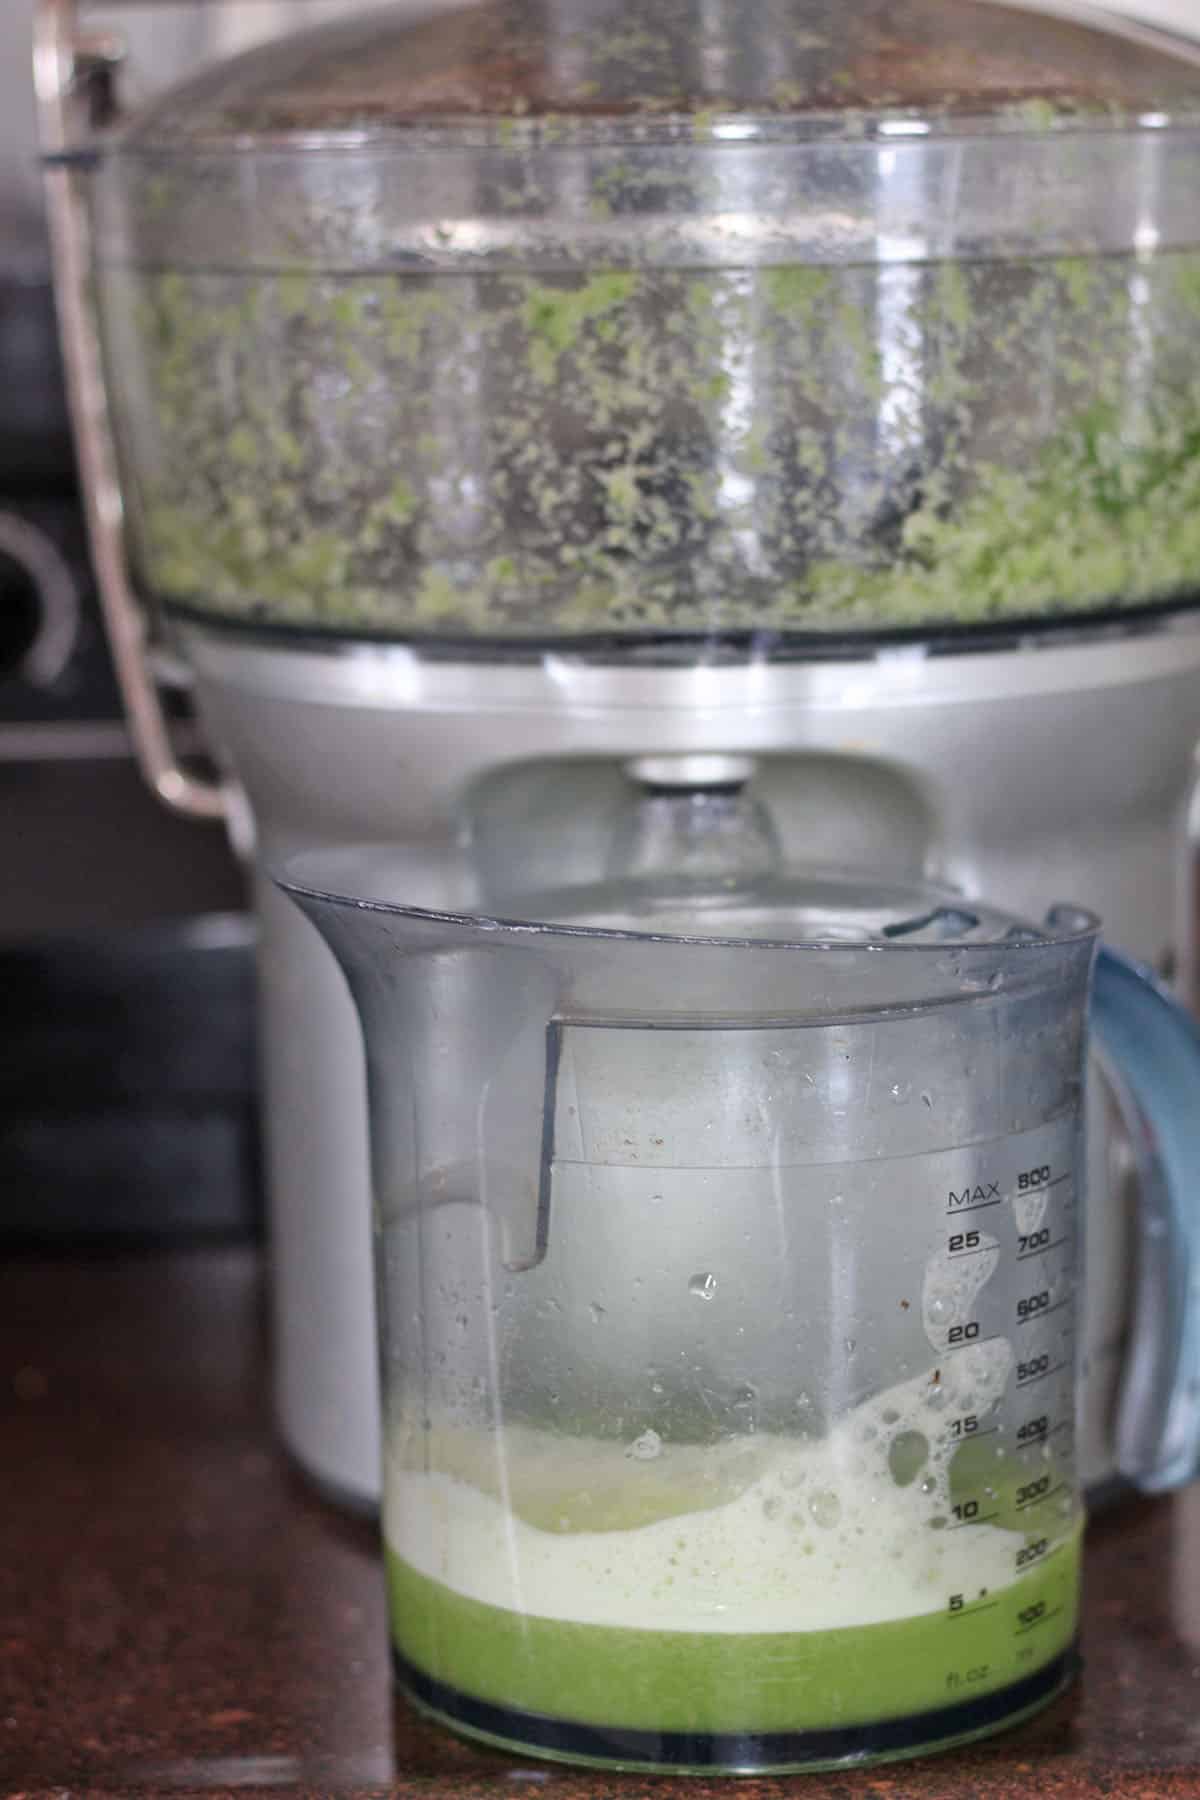 Breville juicer with cucumber celery apple juice in pitcher.